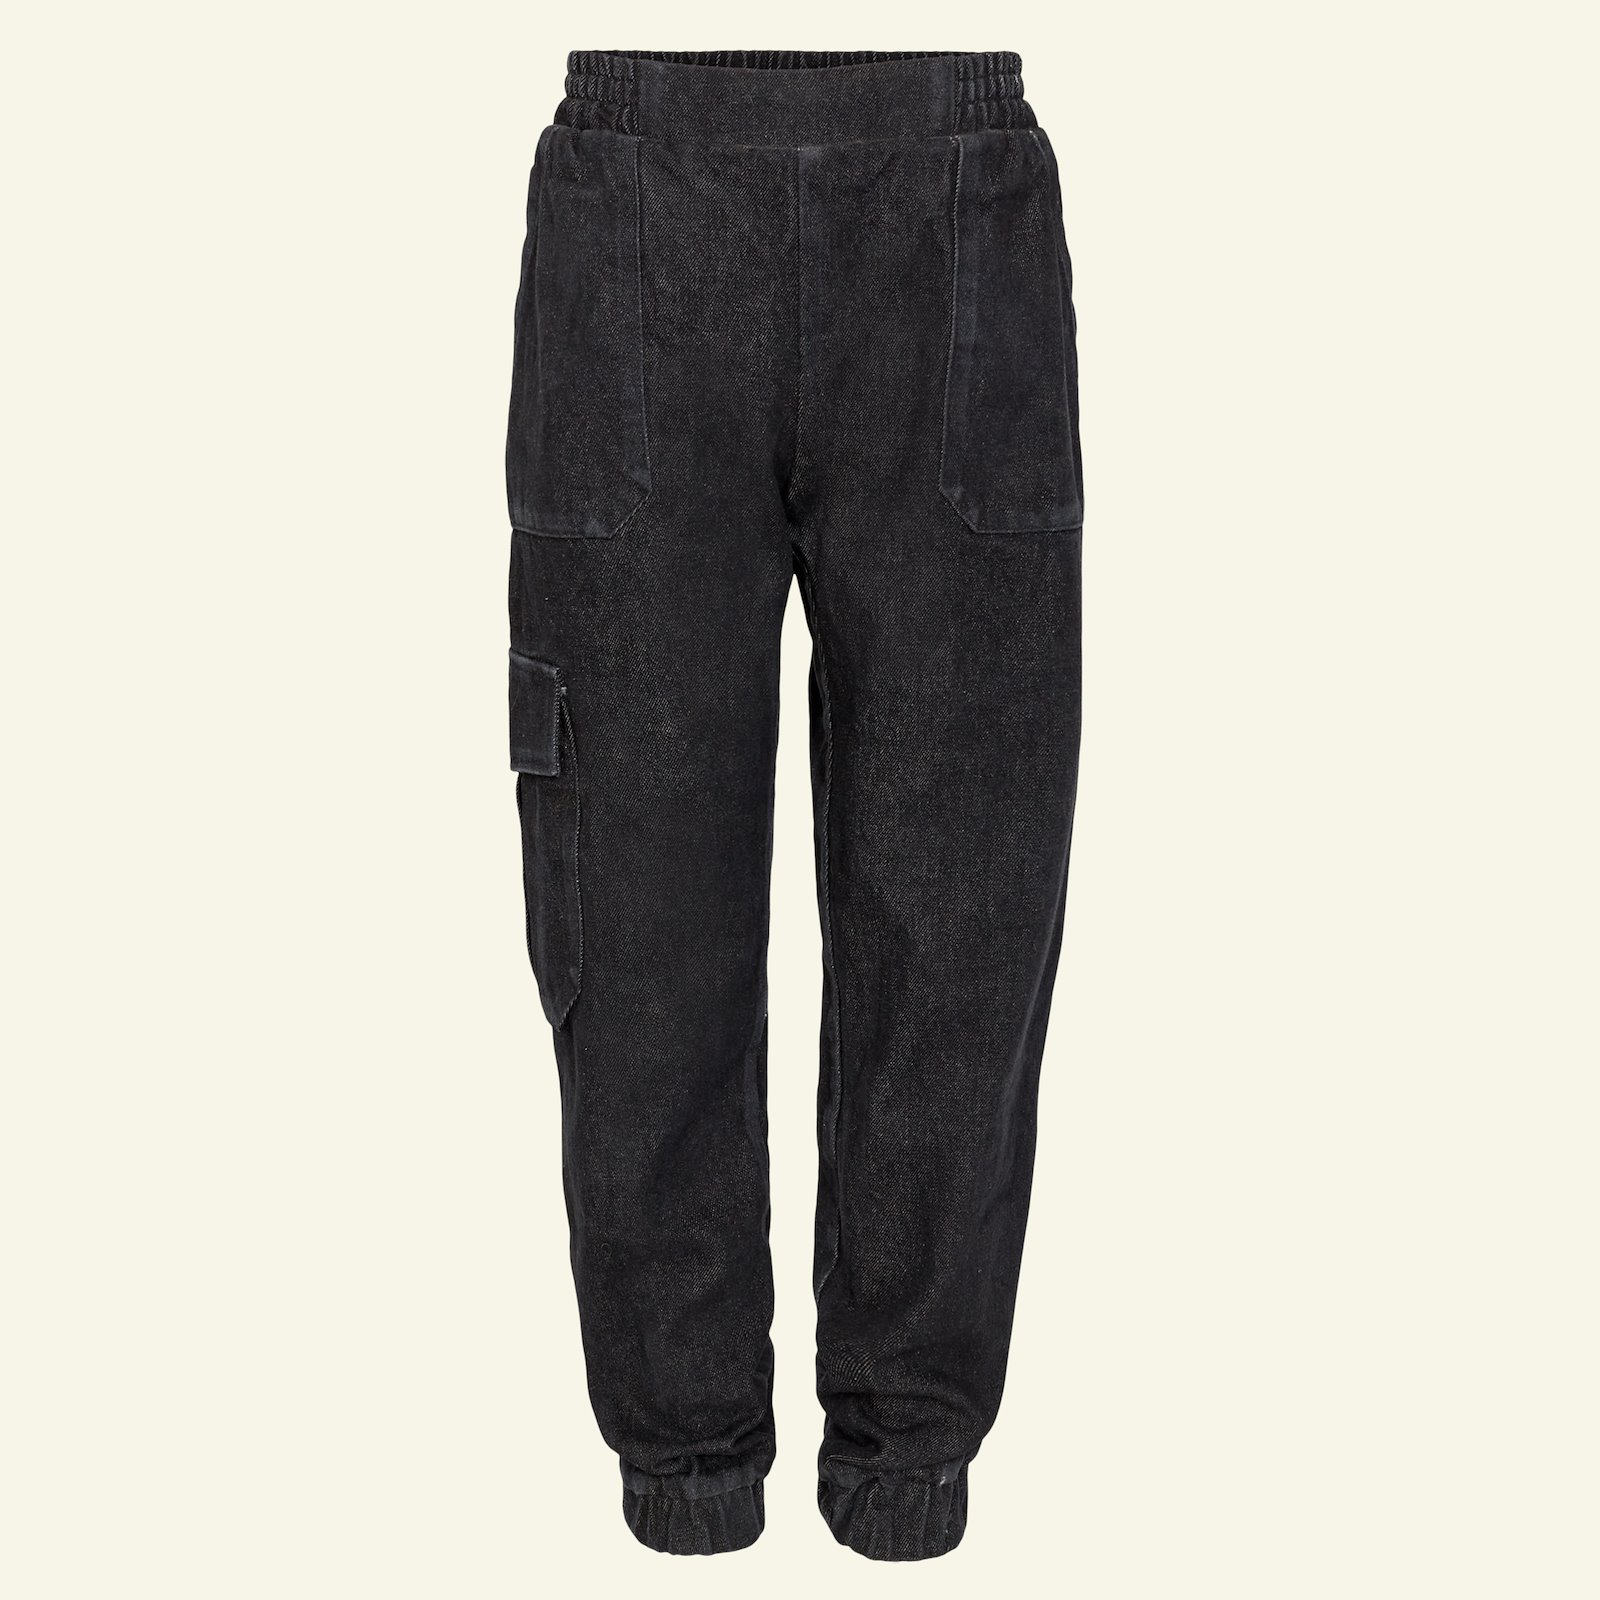 Cargo trousers, 98/3y p60037_5343_sskit